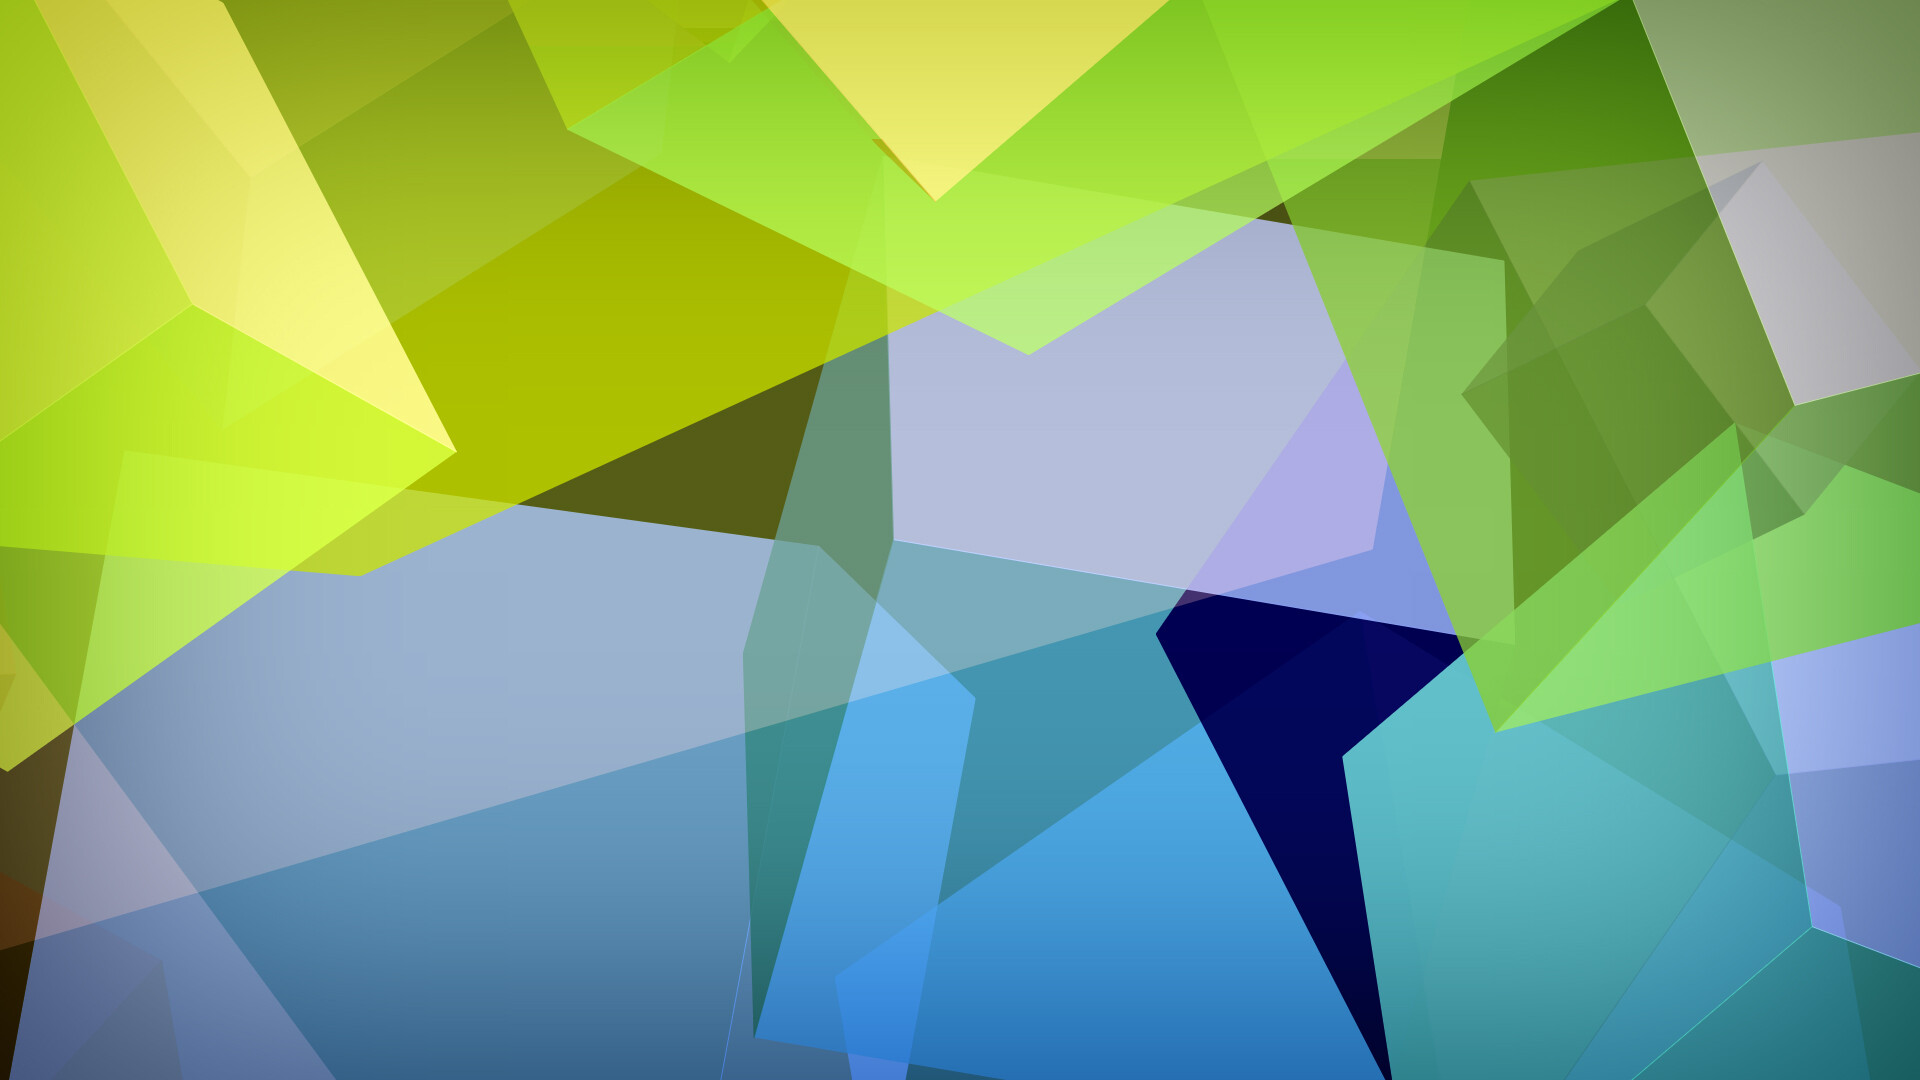 Geometric Abstract: Pyramids, Cubes, Transparent, Quadrilateral prism. 1920x1080 Full HD Wallpaper.